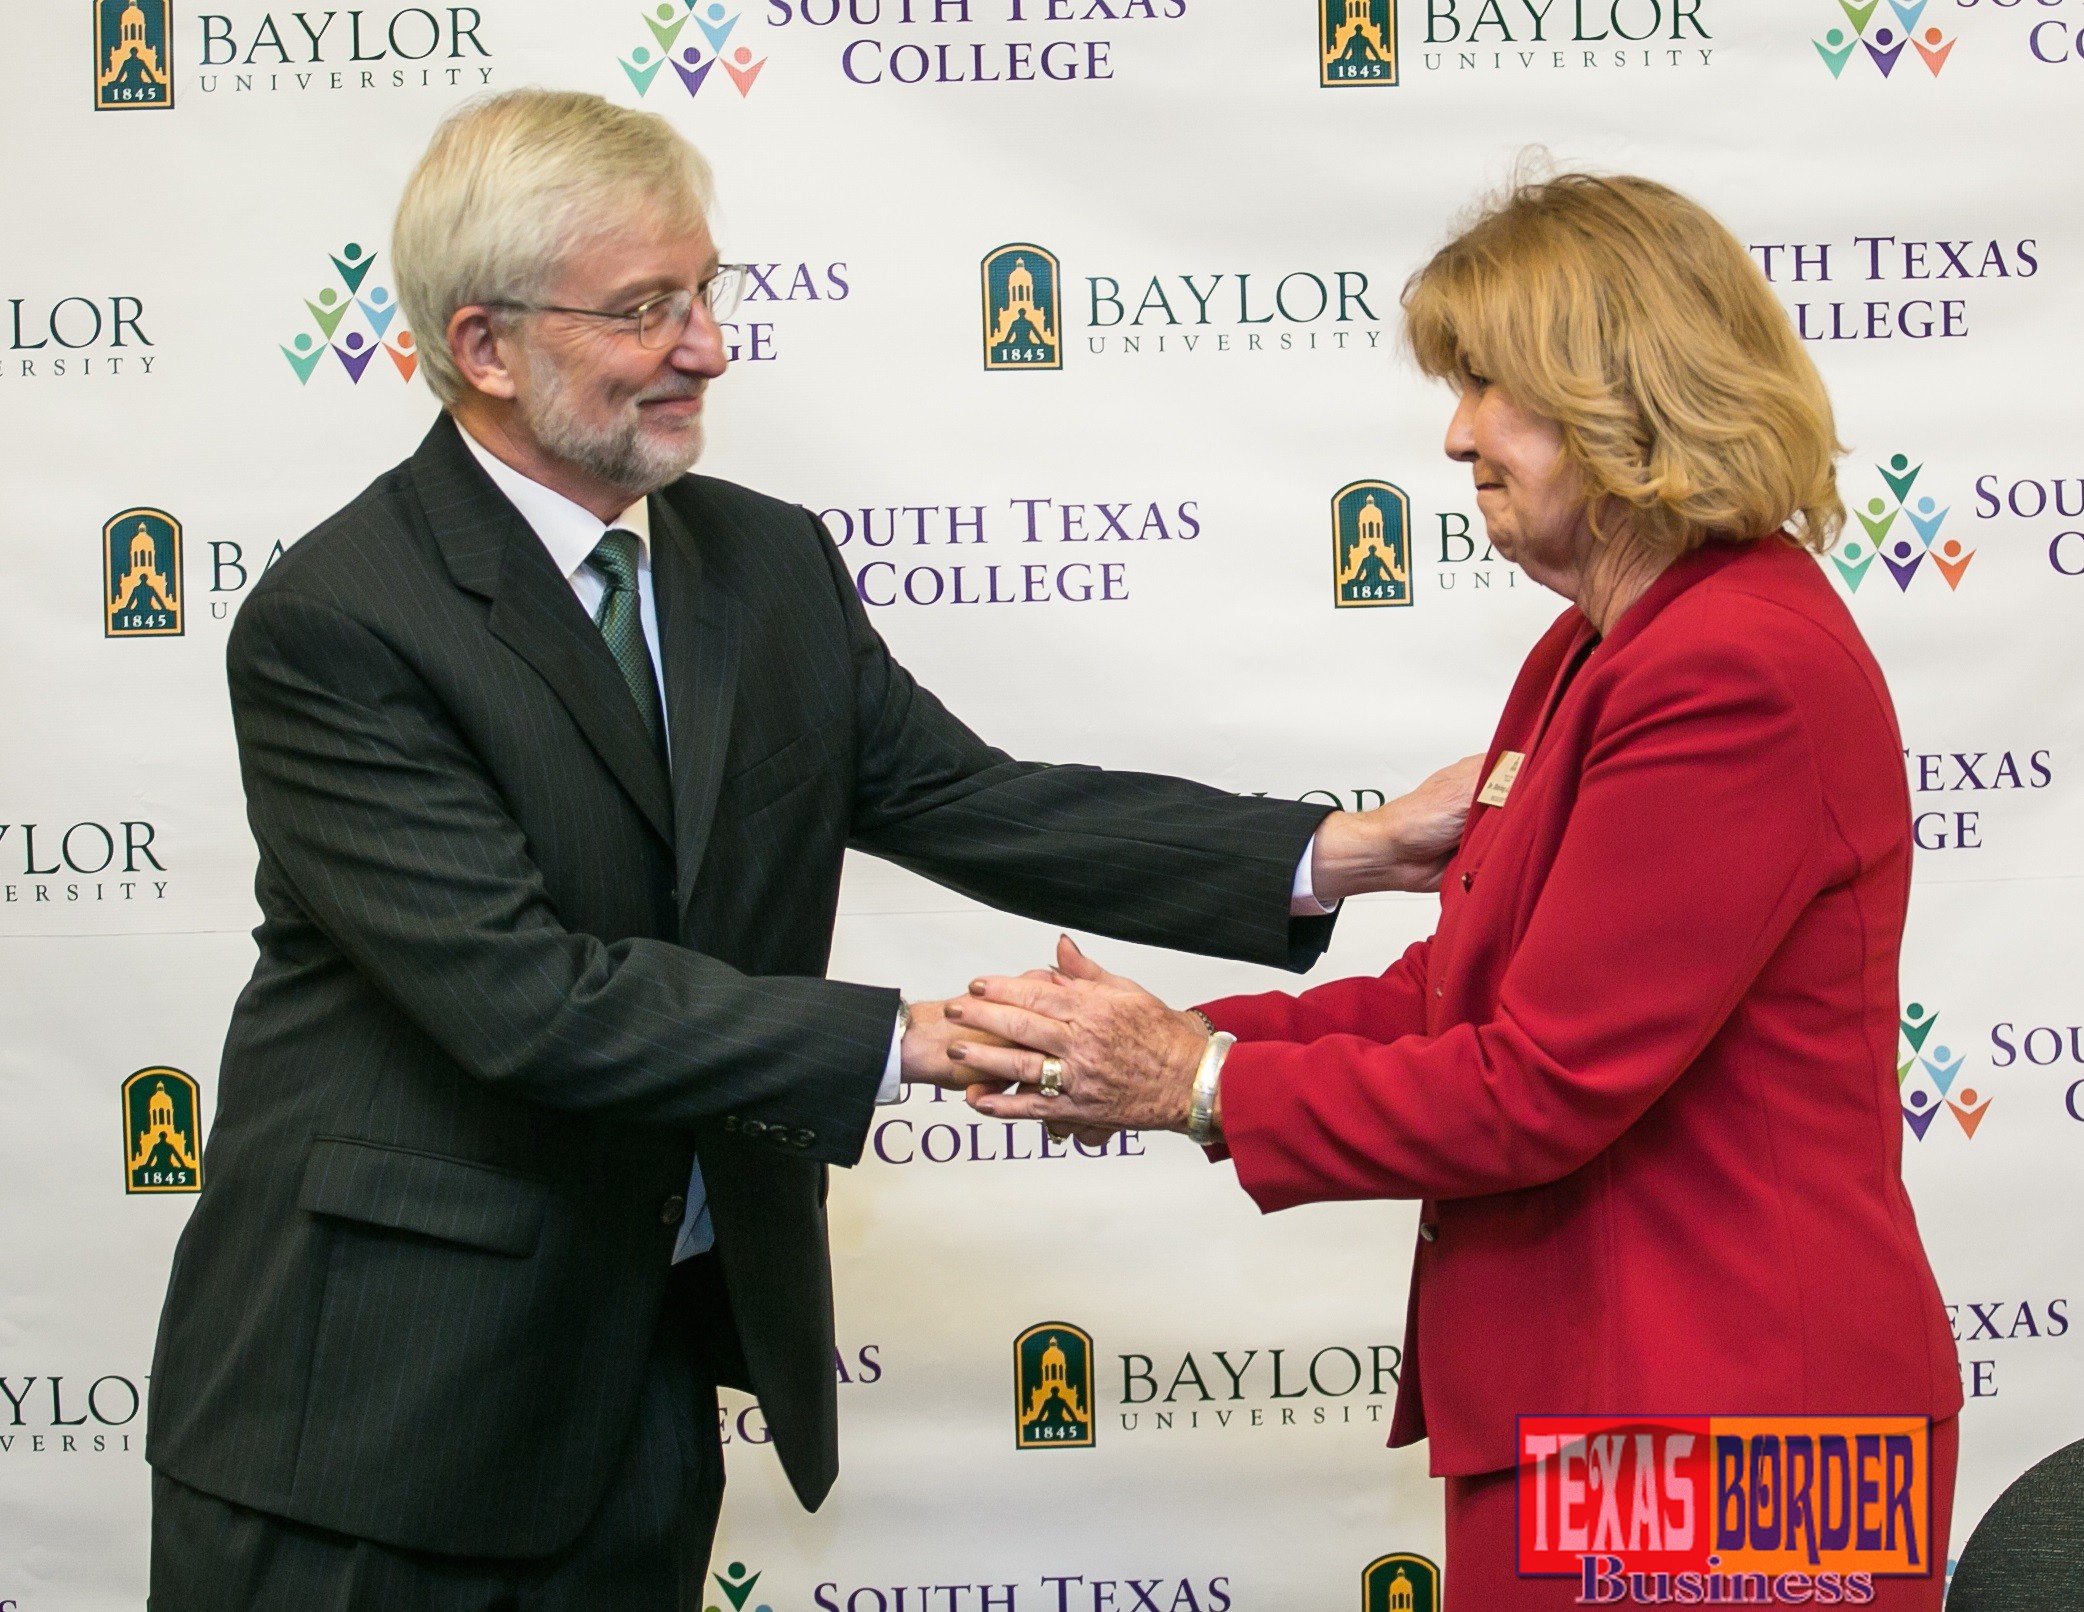 Baylor University Interim President David E. Garland, Ph.D., and South Texas College President Shirley A. Reed, Ed.D.